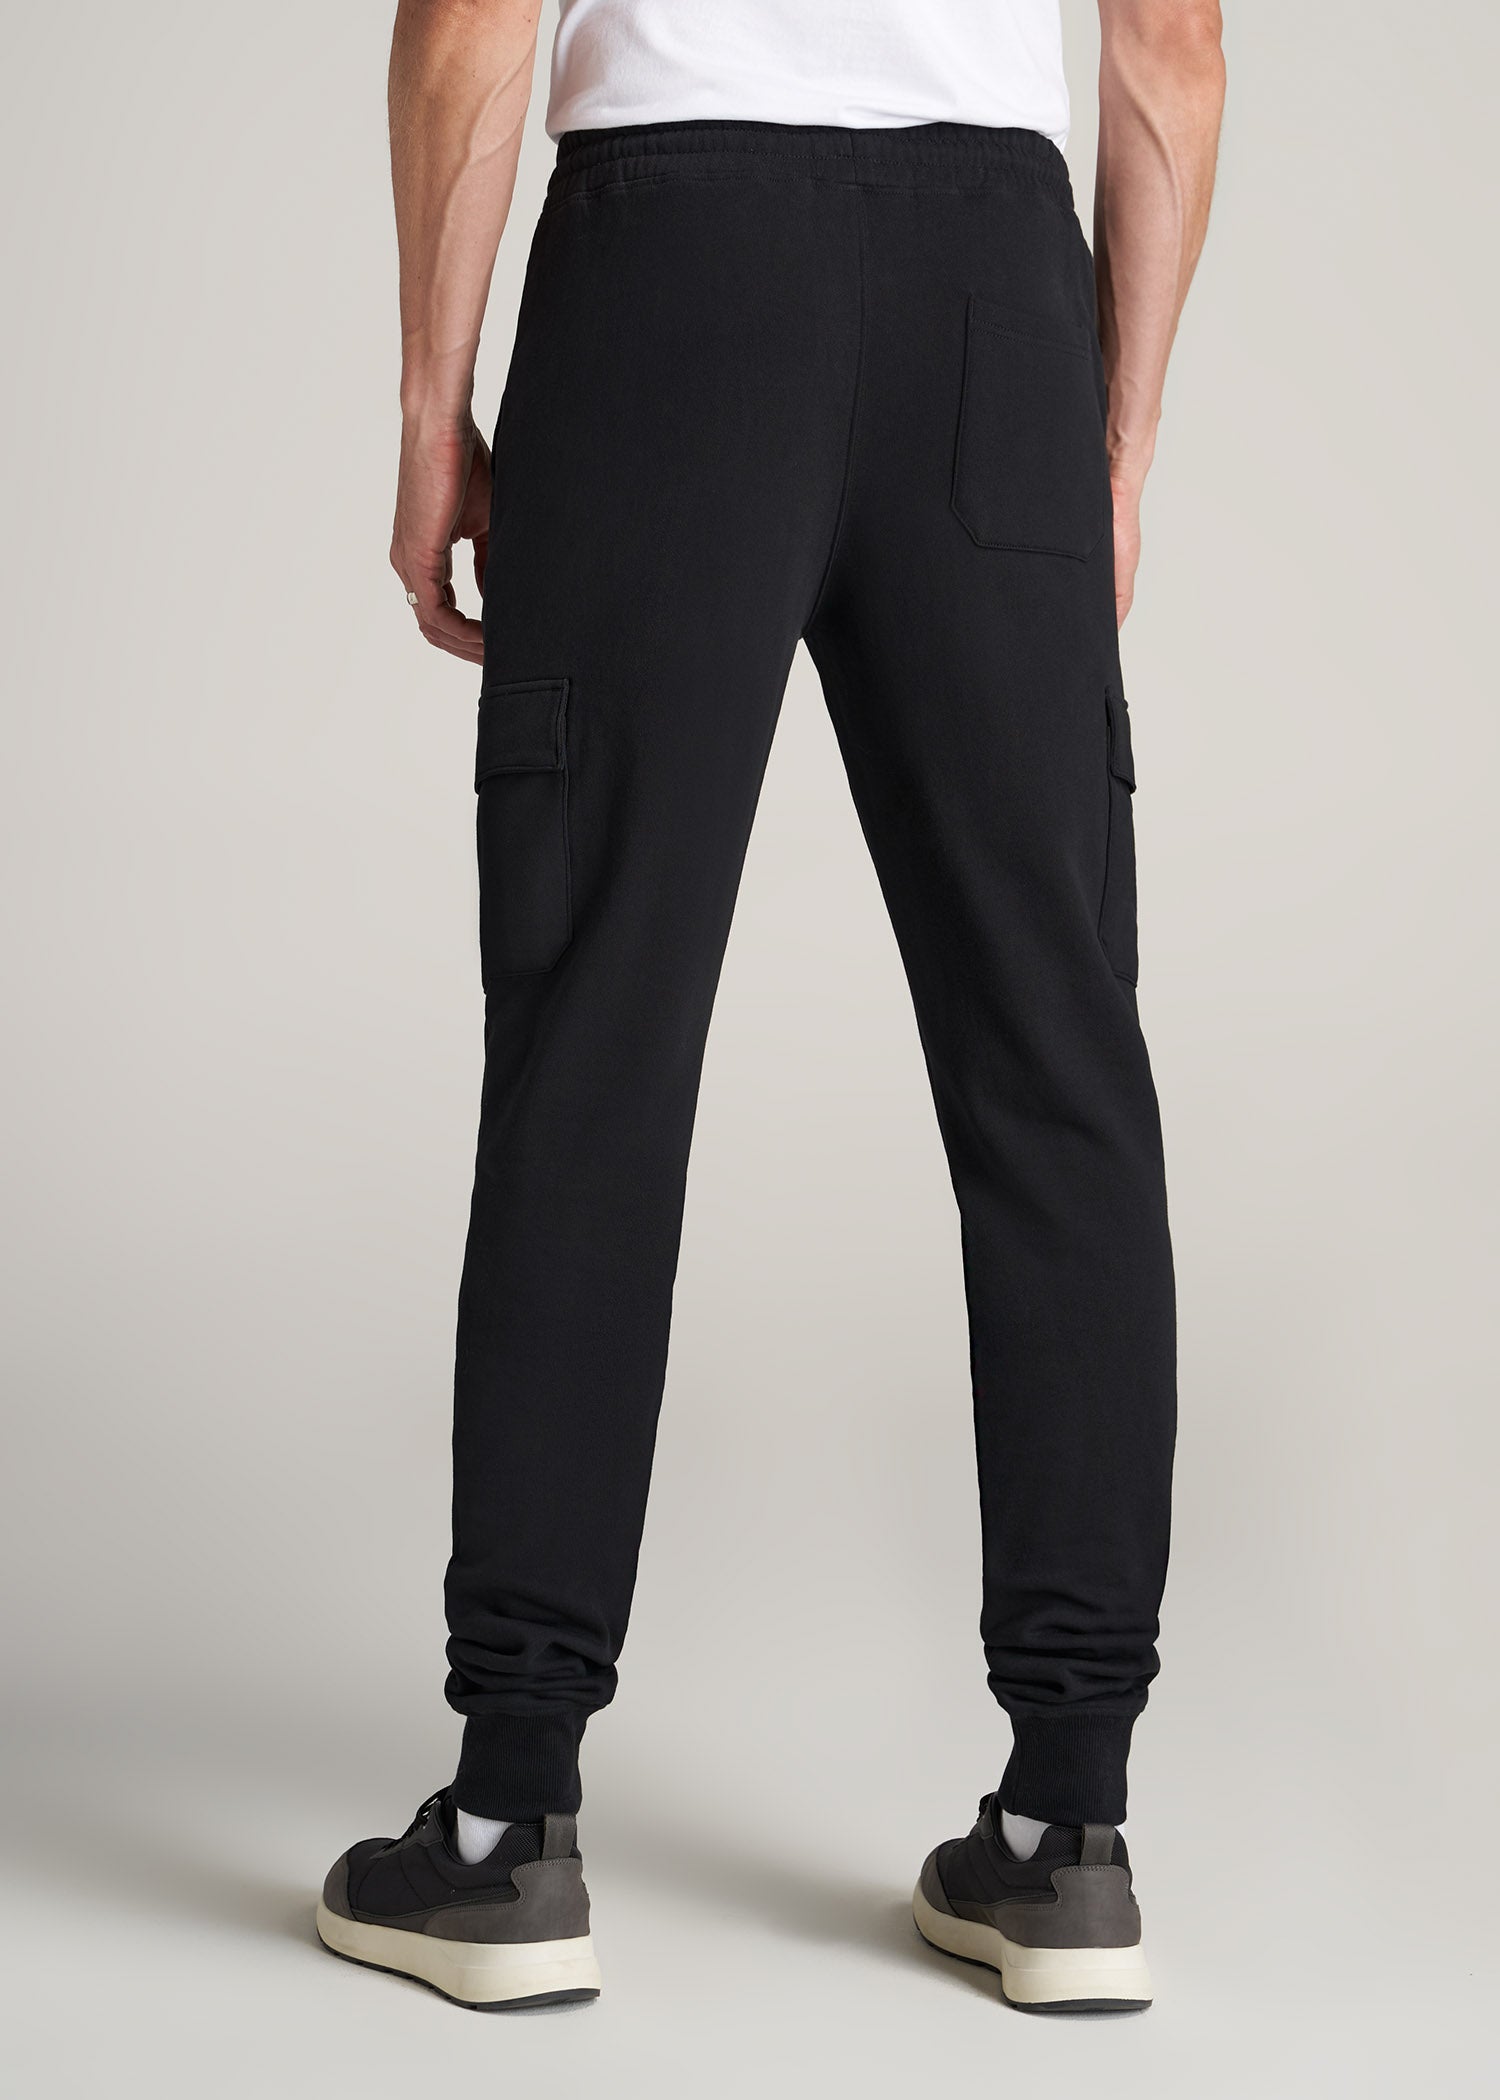 Tall Black Cargo Detail Casual Sweatpant